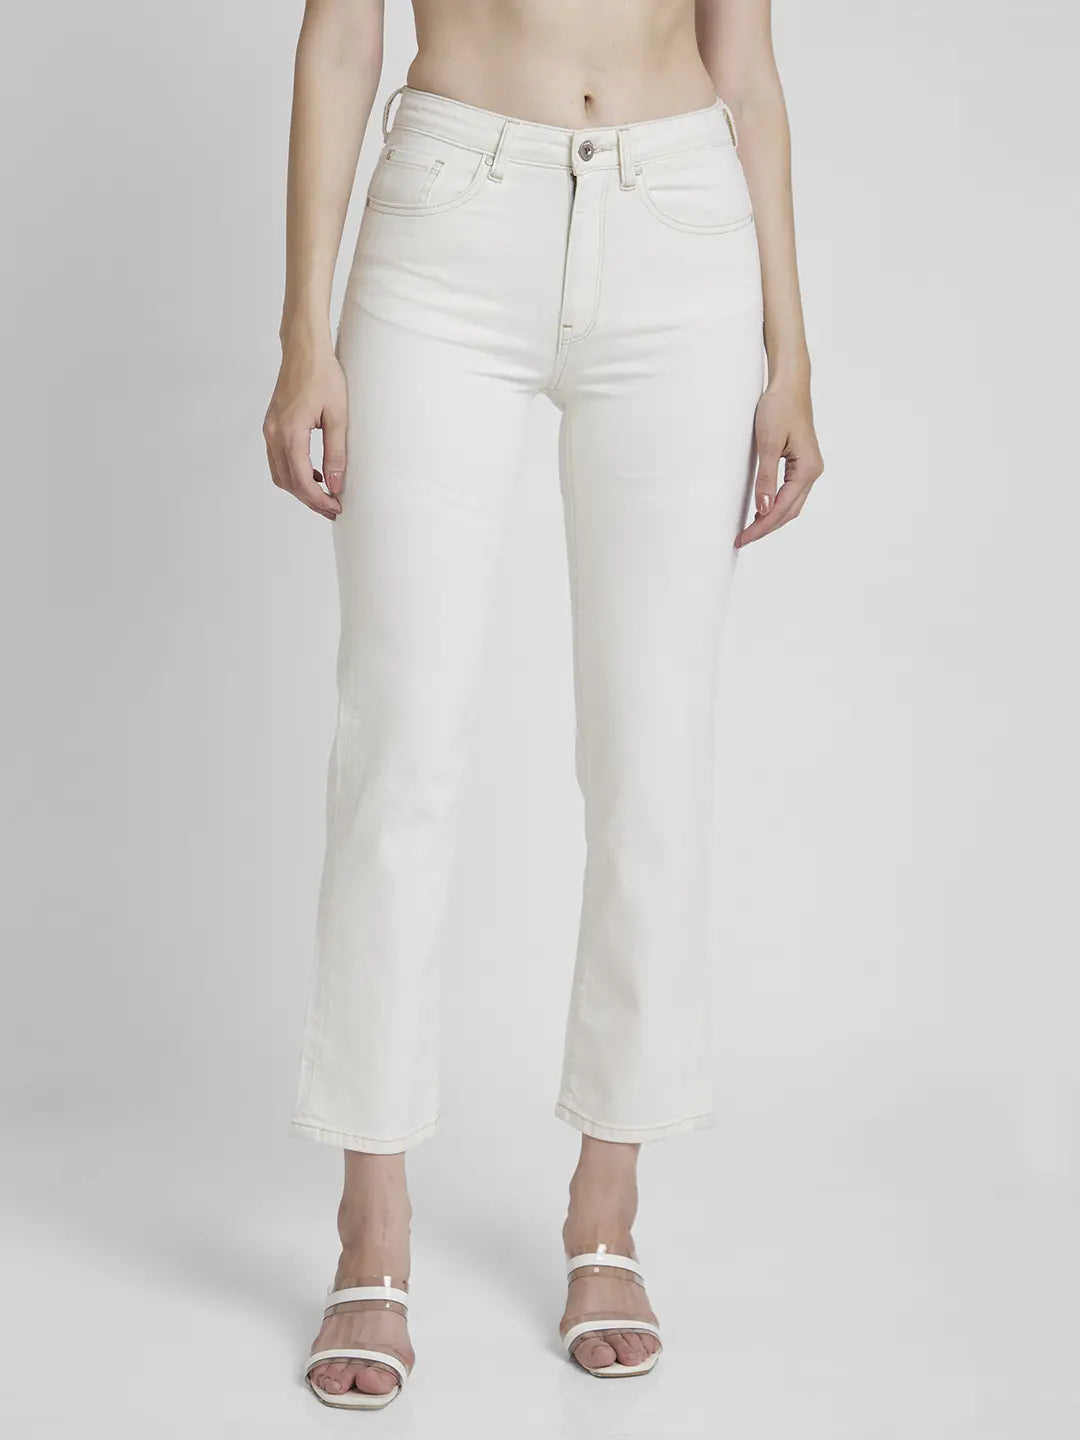 High-Waisted Wow Straight White Jeans | Old Navy